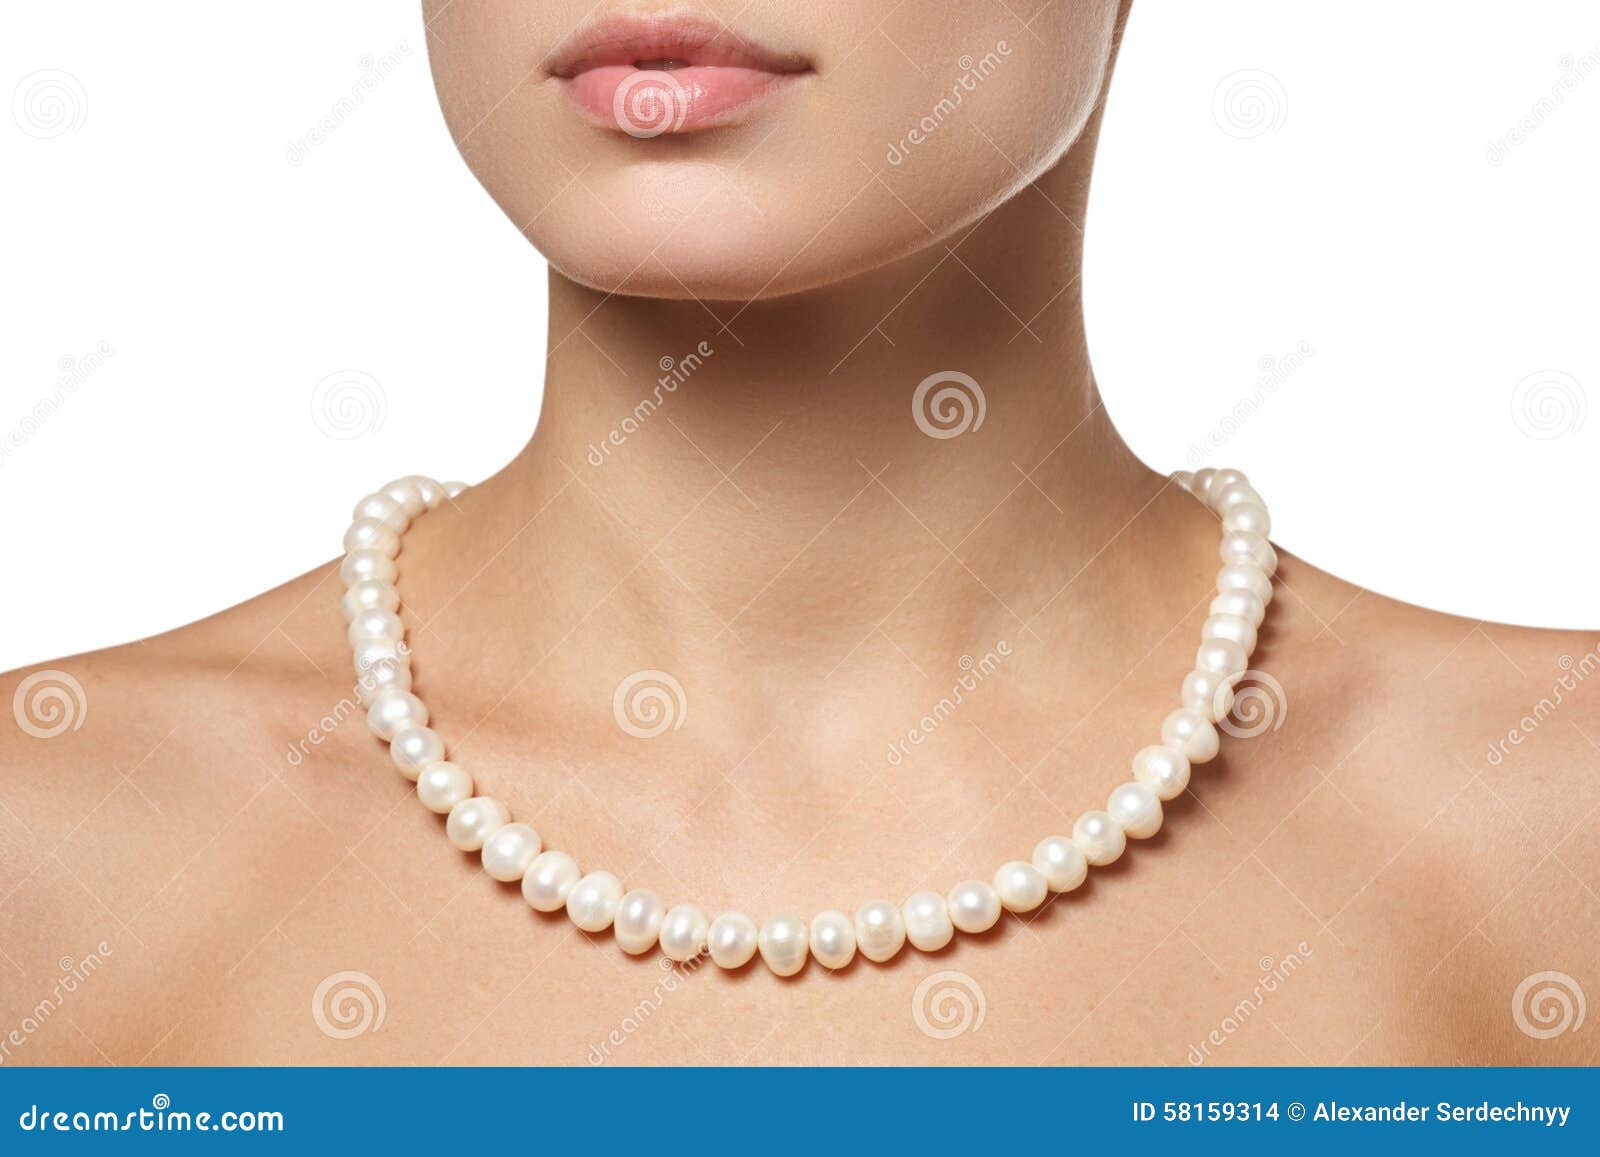 beautiful fashion pearls necklace on the neck. jewellery and bijouterie